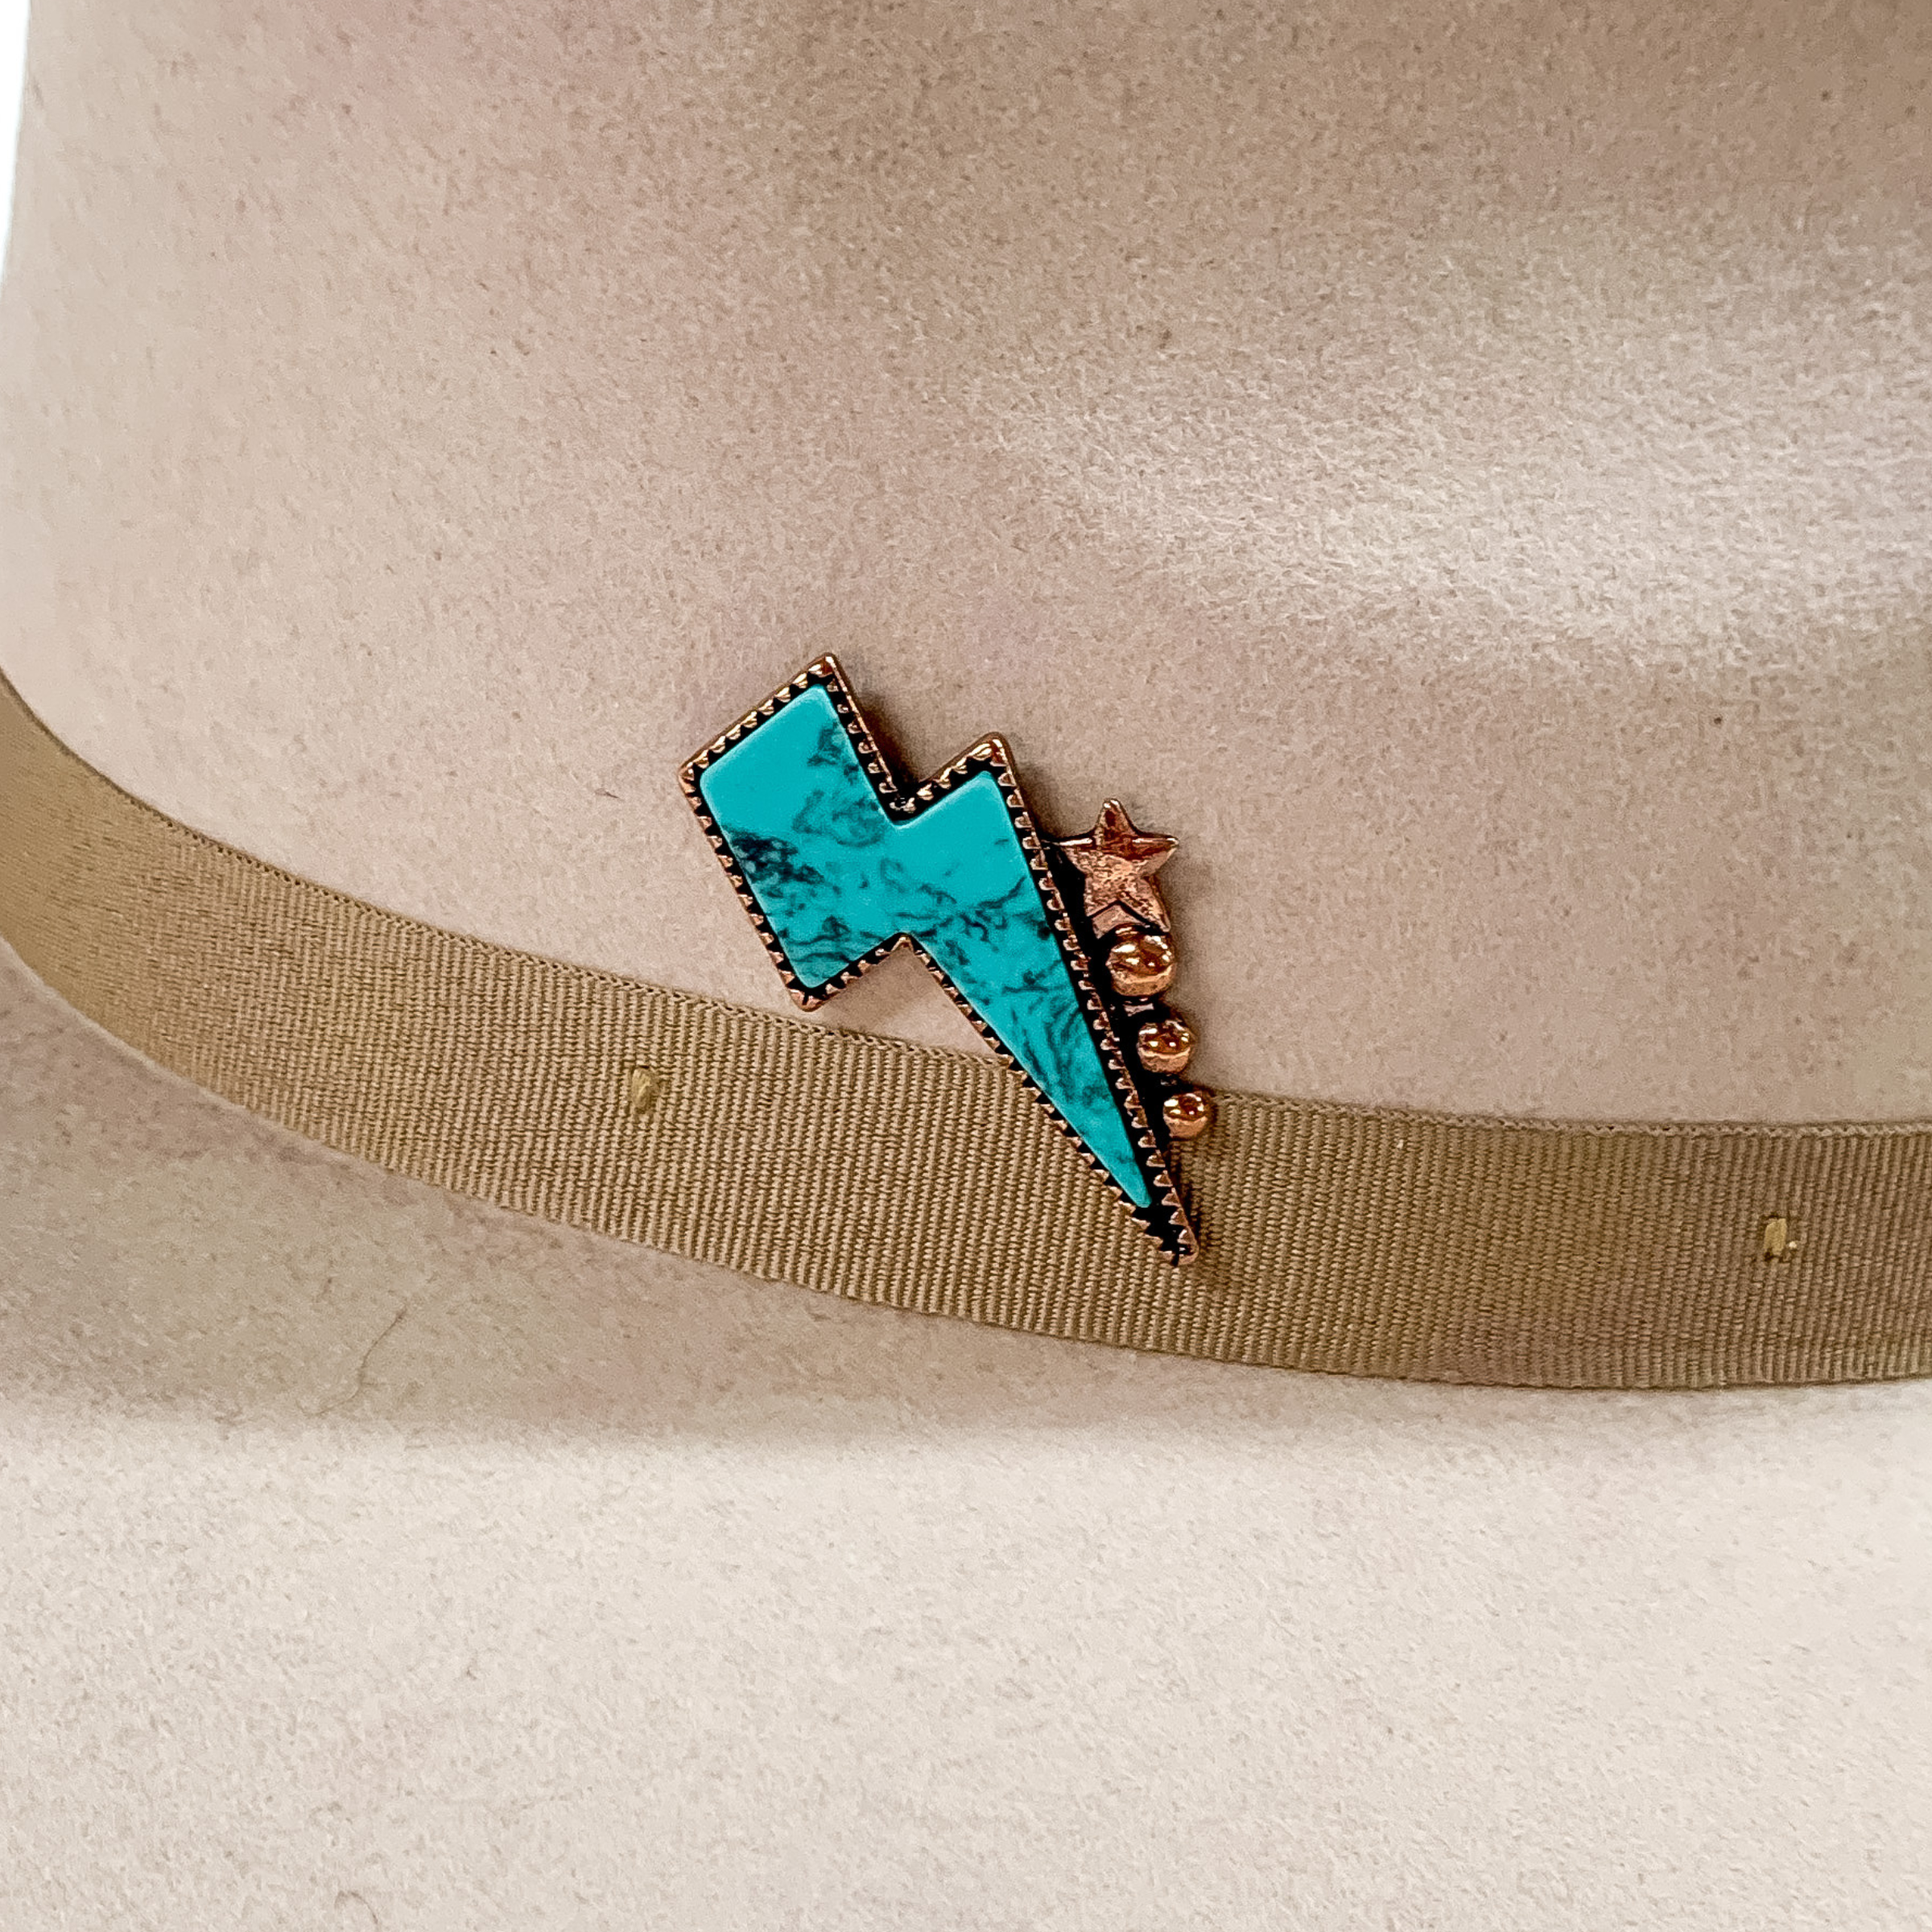 Turquoise Lightning Bolt Hat Pin in Copper Tone - Giddy Up Glamour Boutique